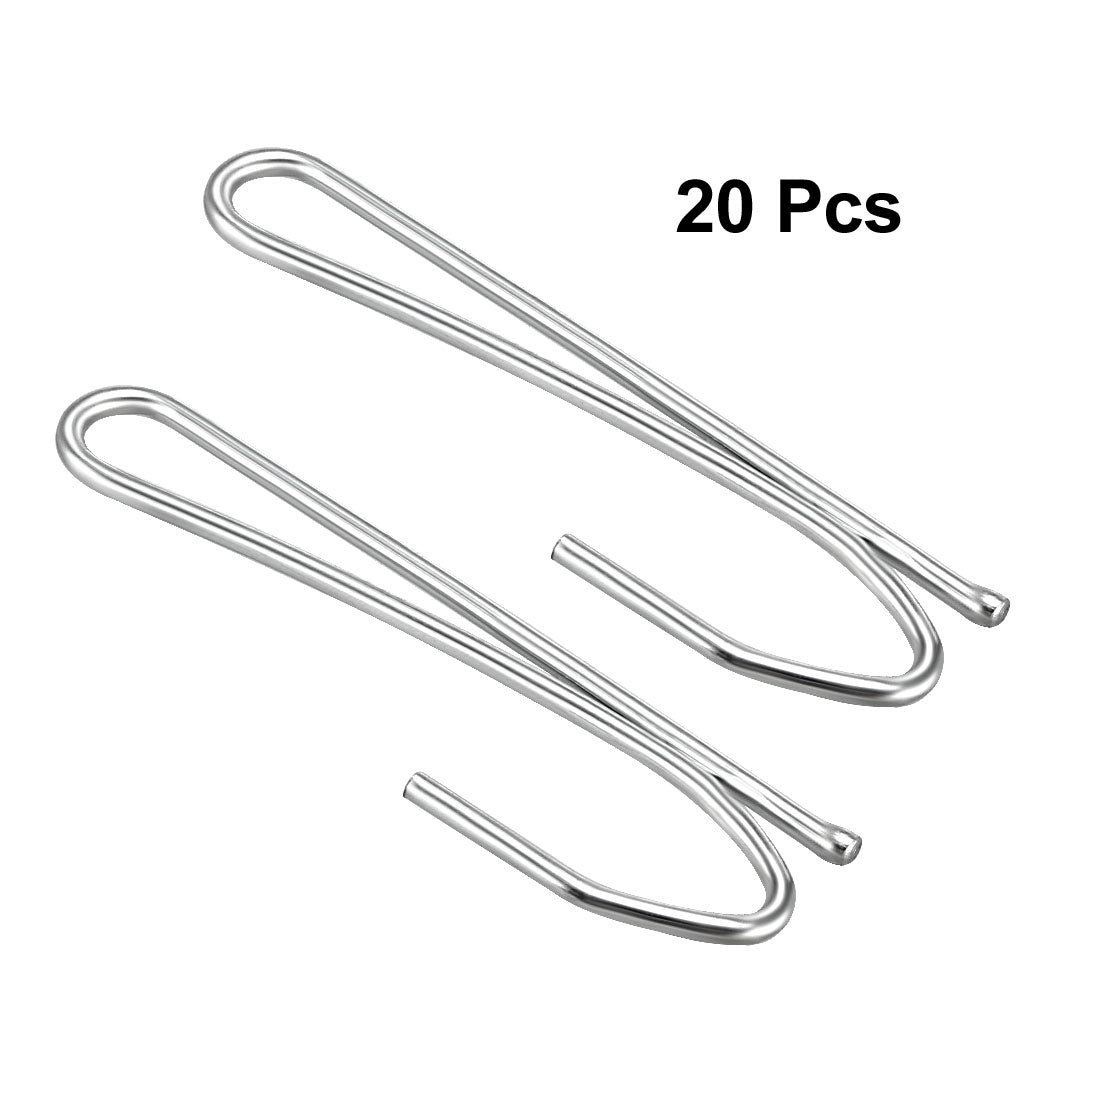 uxcell Uxcell Curtain Hooks Metal Single Prongs Pinch Pleat Drapery Hook for Drapes Tapes Silver Tone 20 Pcs